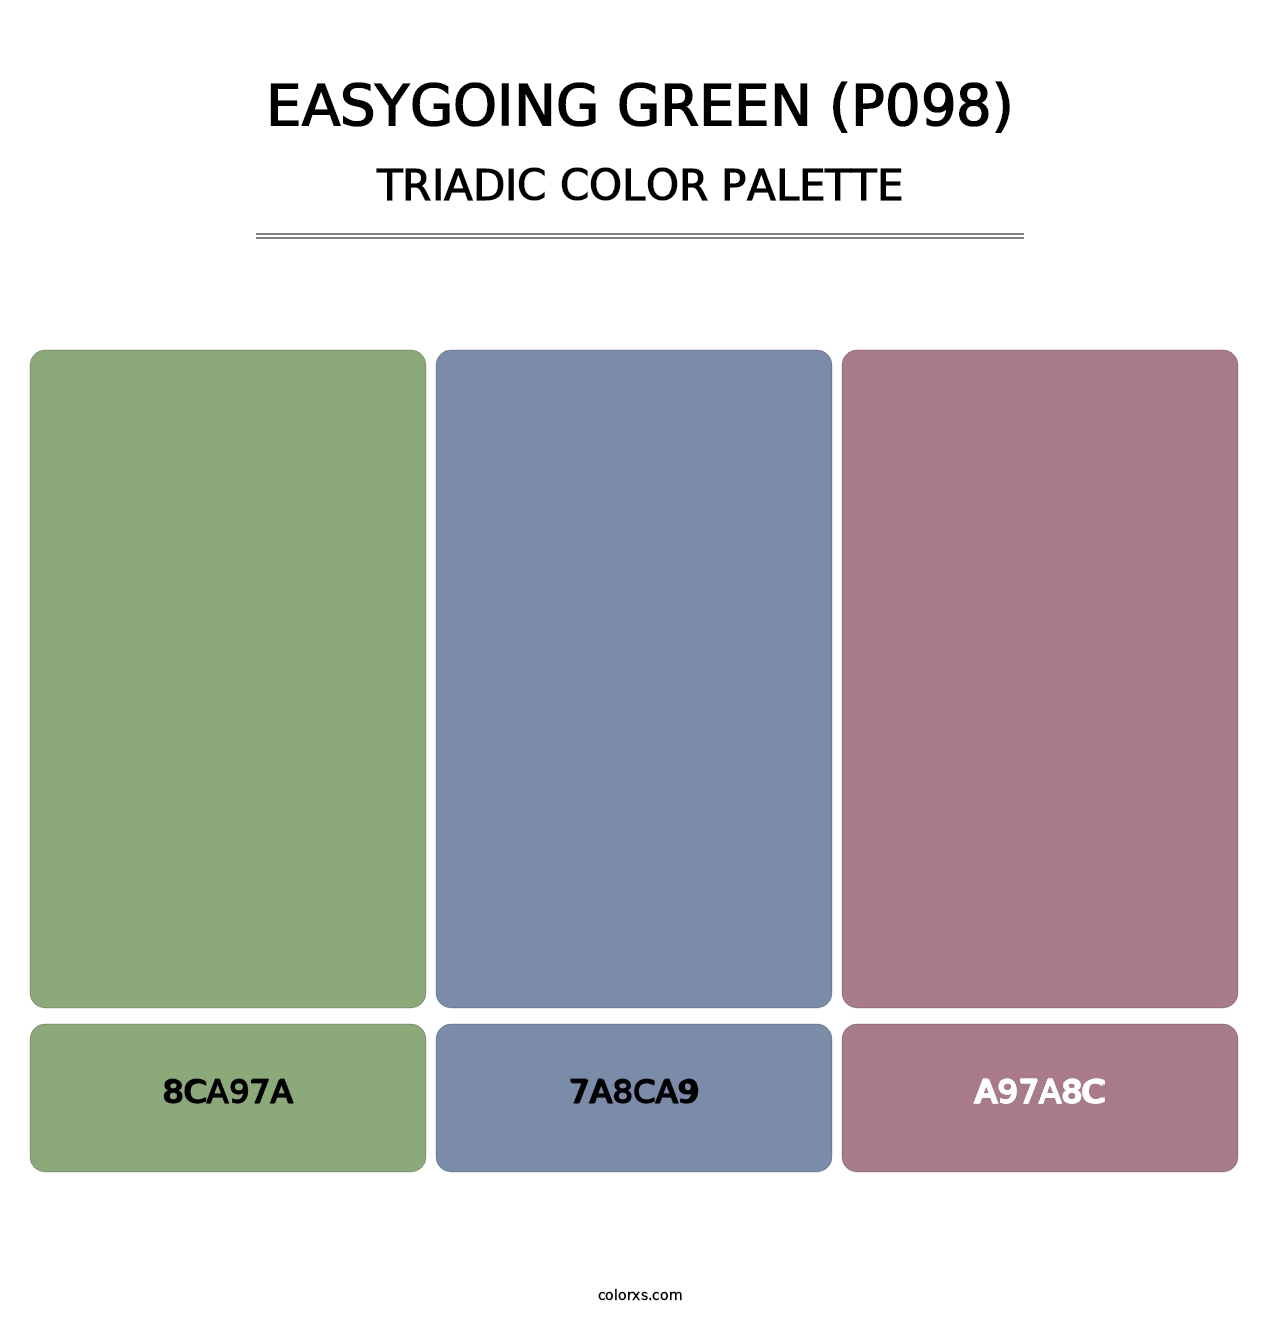 Easygoing Green (P098) - Triadic Color Palette